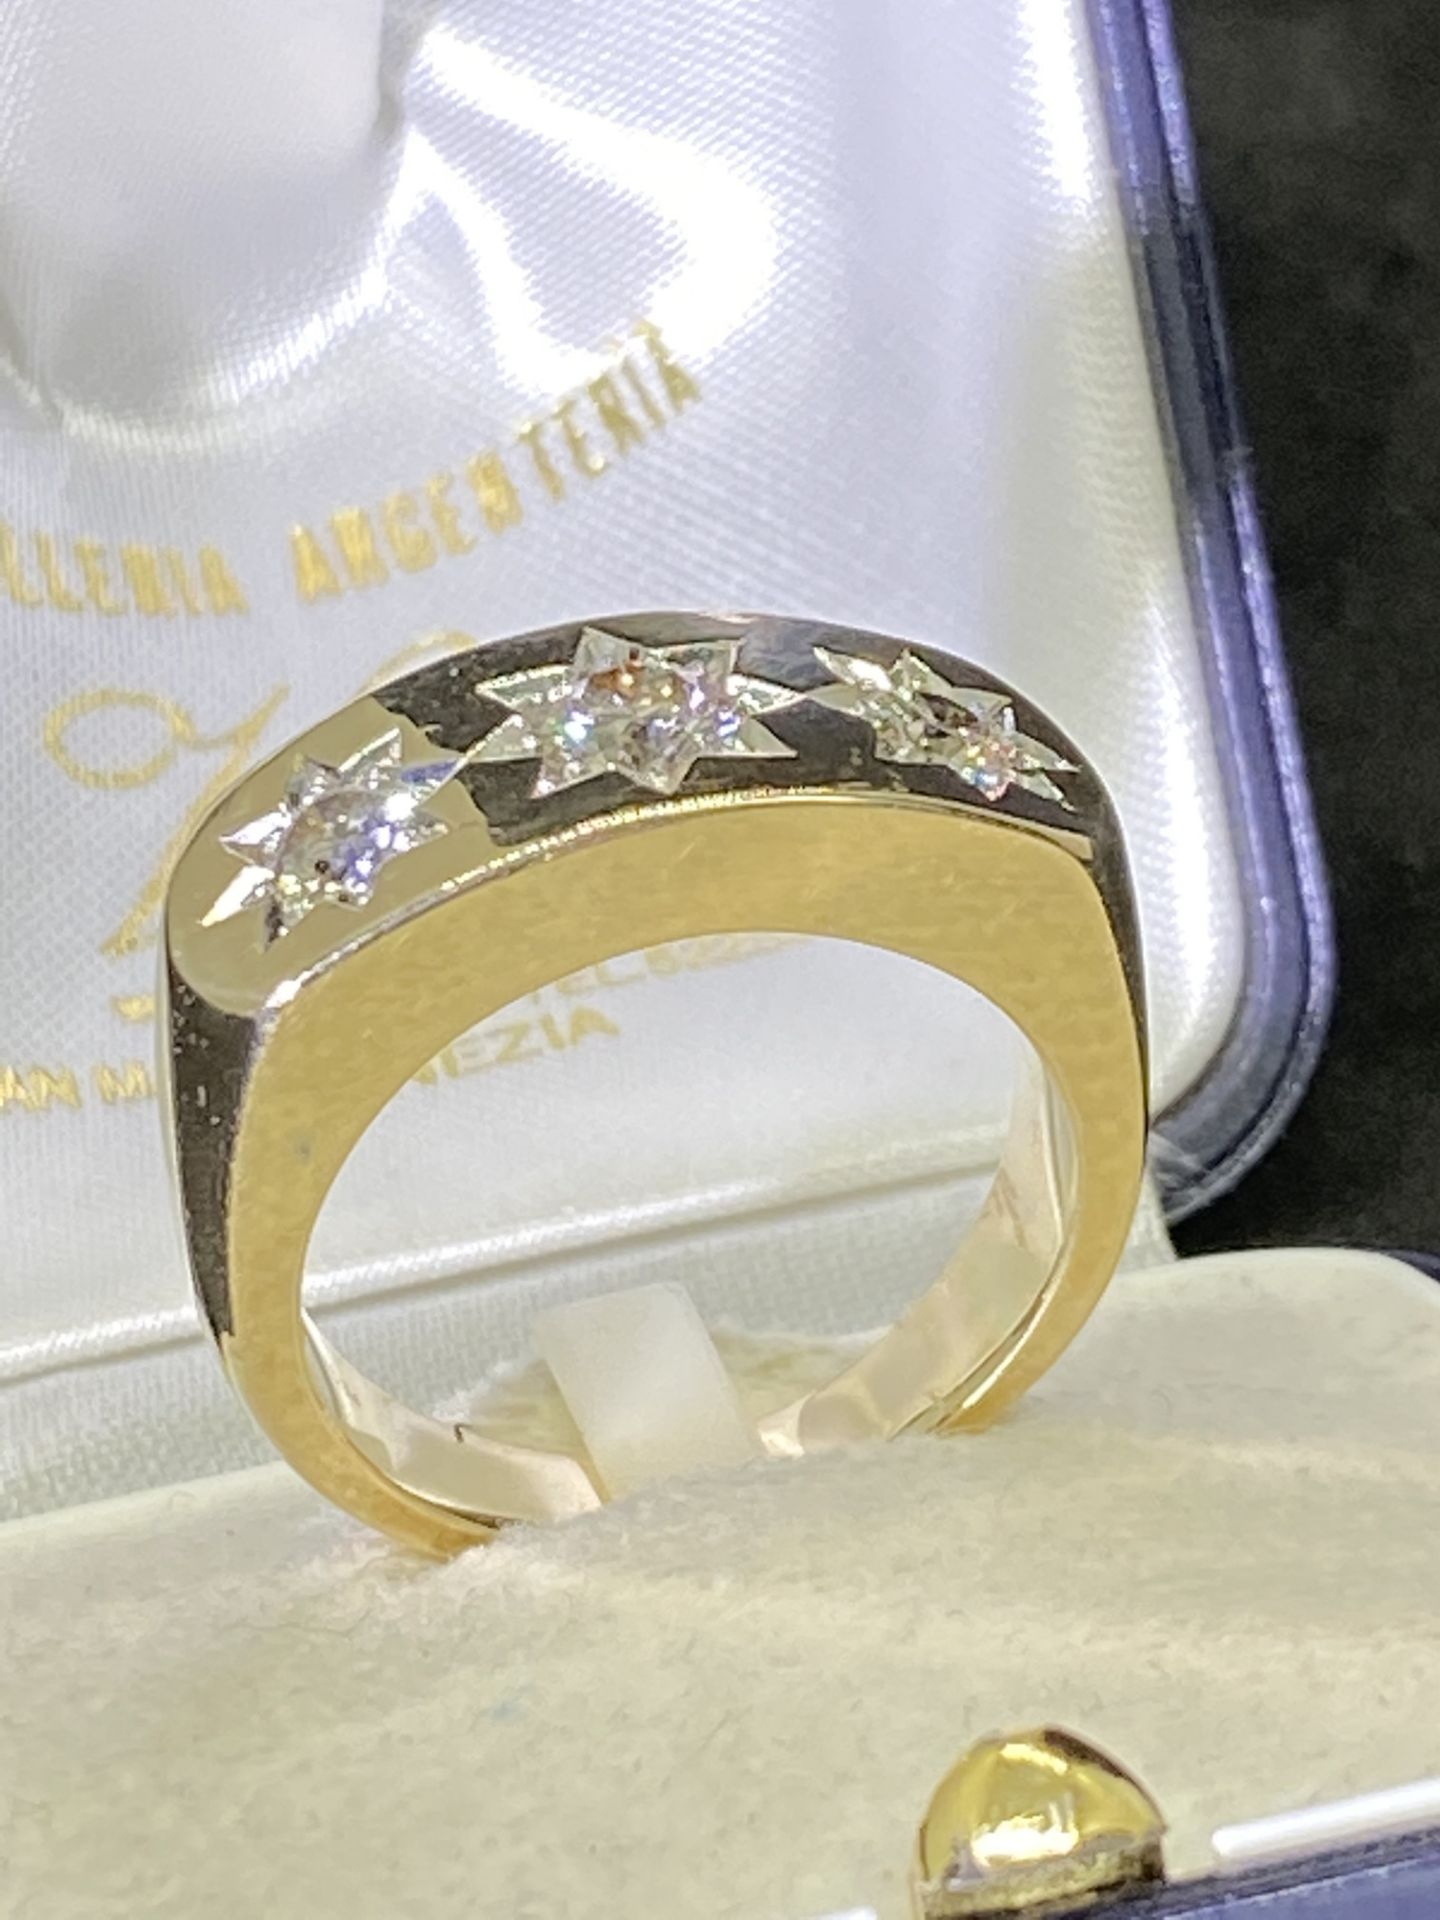 HEAVY 9ct YELLOW GOLD APPROX 13.9 GRAM 3 STONE 1.05ct DIAMOND GYPSY RING - APPROX SIZE U - Image 2 of 4